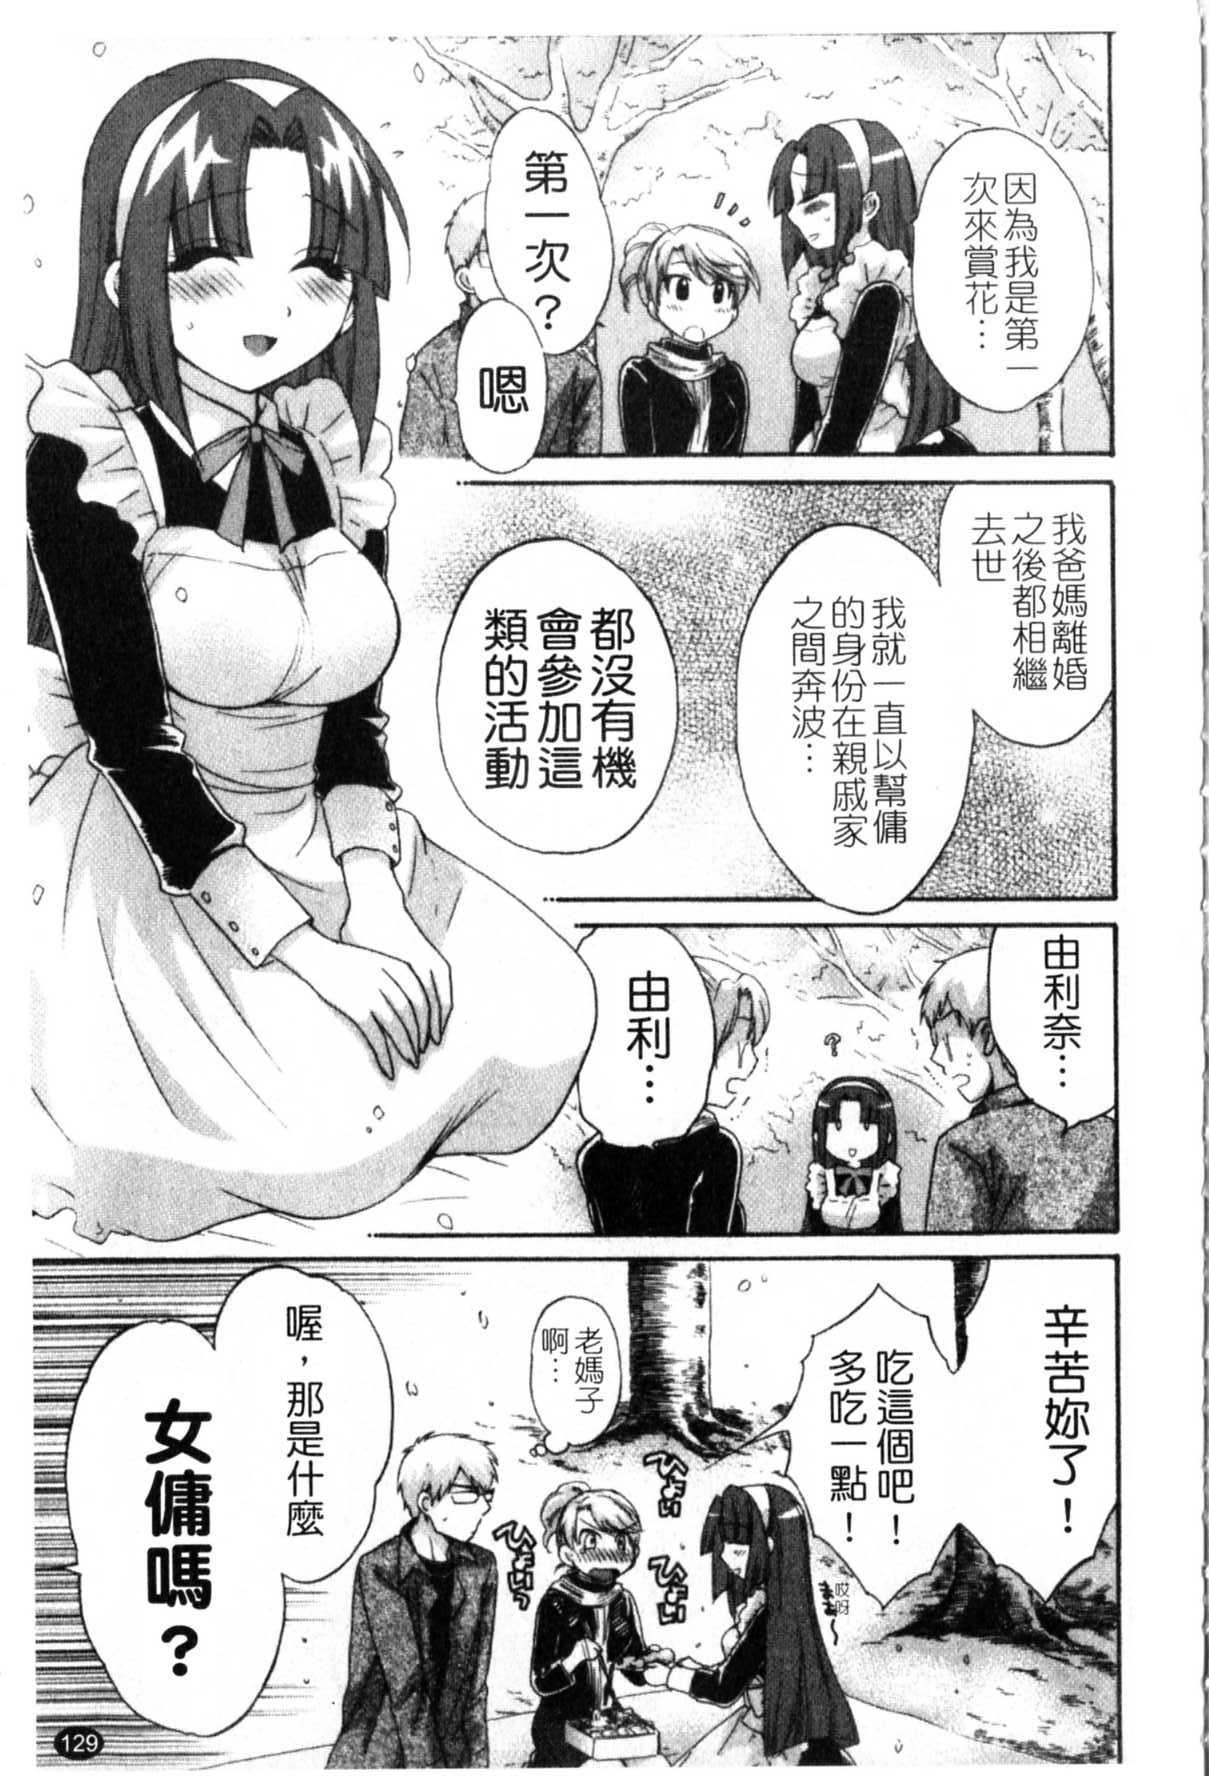 [Pon Takahanada] A Hundred of the Way of 100 Living with Her [CHINESE] [ポン貴花田] 家政婦(かのじょ)と暮らす100の方法 [中文]